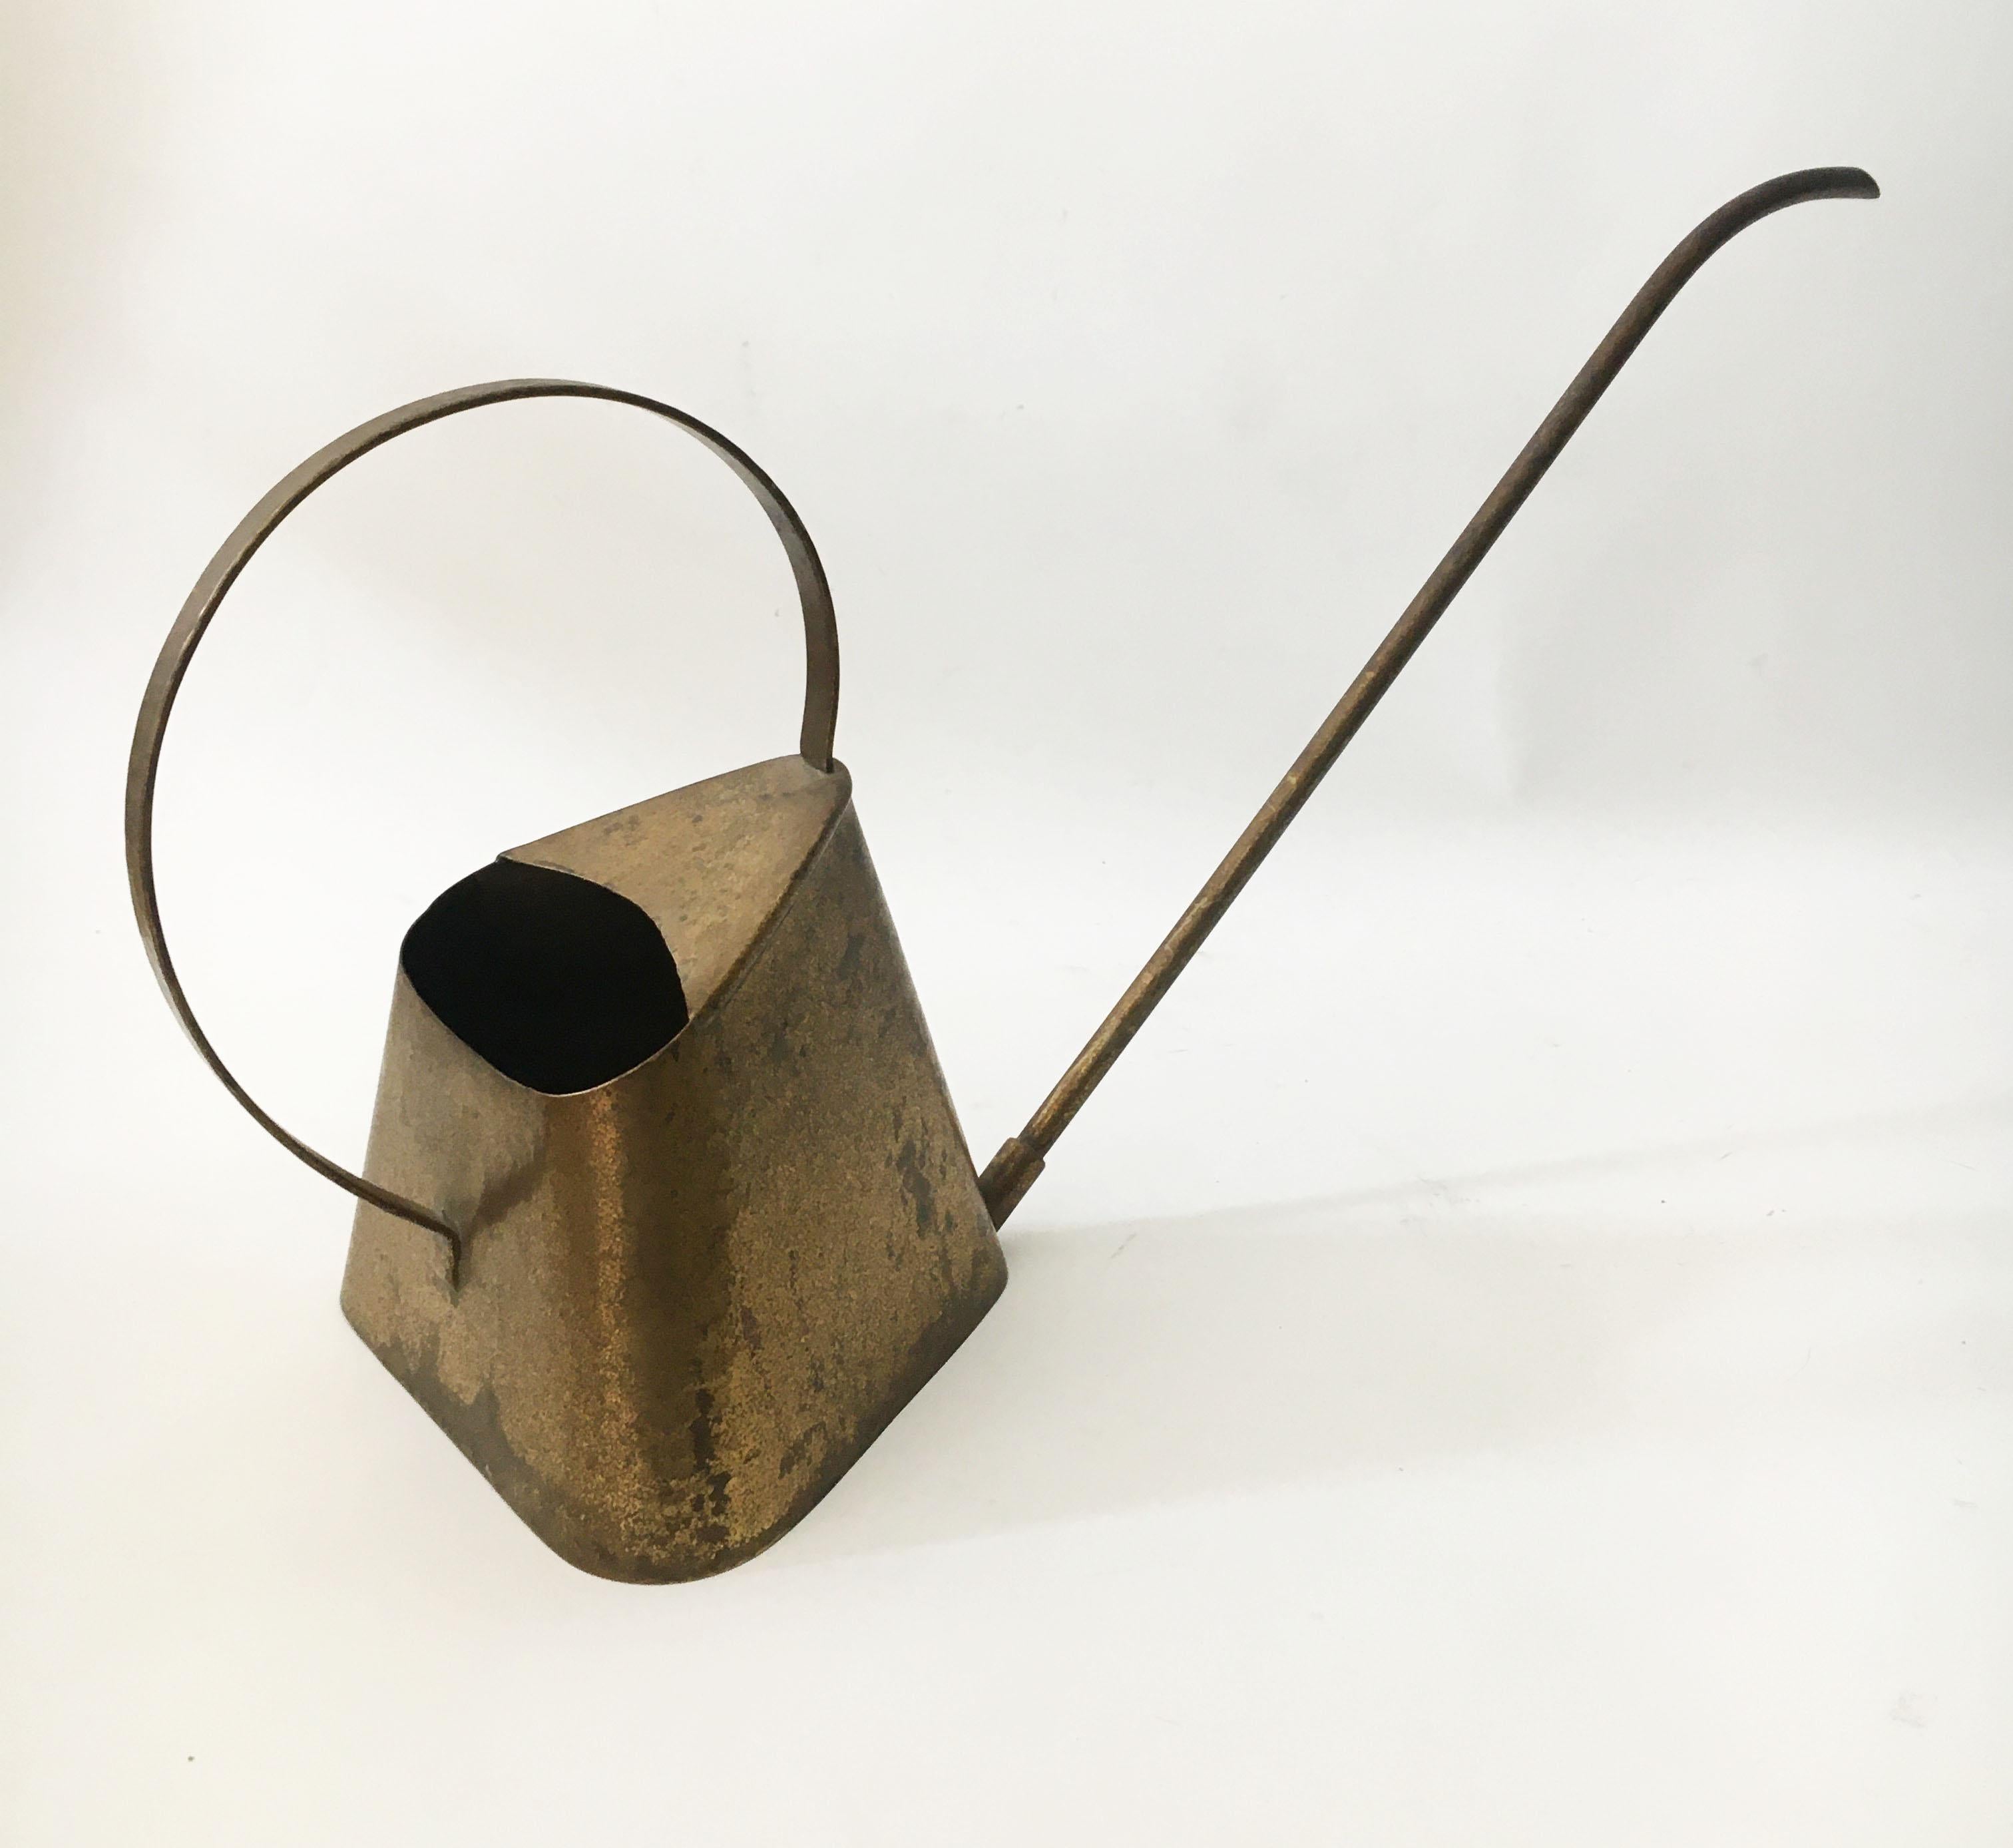 Elegant modernist watering can, patinated brass hammered style, Austria 1950s.